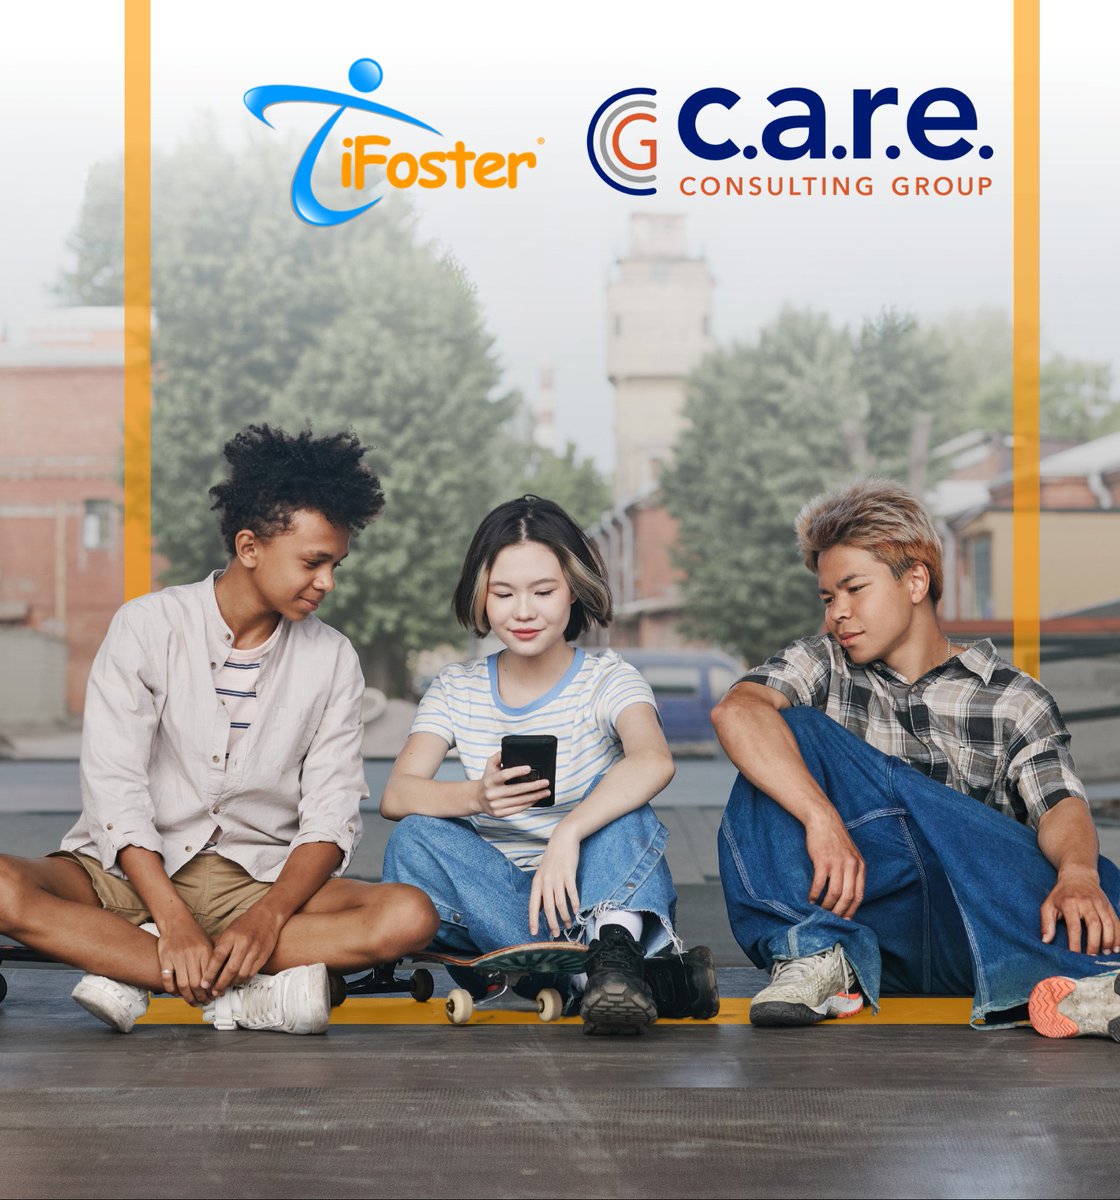 BREAKING: iFoster's monthly National & CA Newsletters are focused on National Foster Care Month! Highlights include: The Voice of the Foster Care Community Report, upcoming foster family events, big announcements & more! Read here: bit.ly/3UMCZ6e #iAmiFoster #Resources